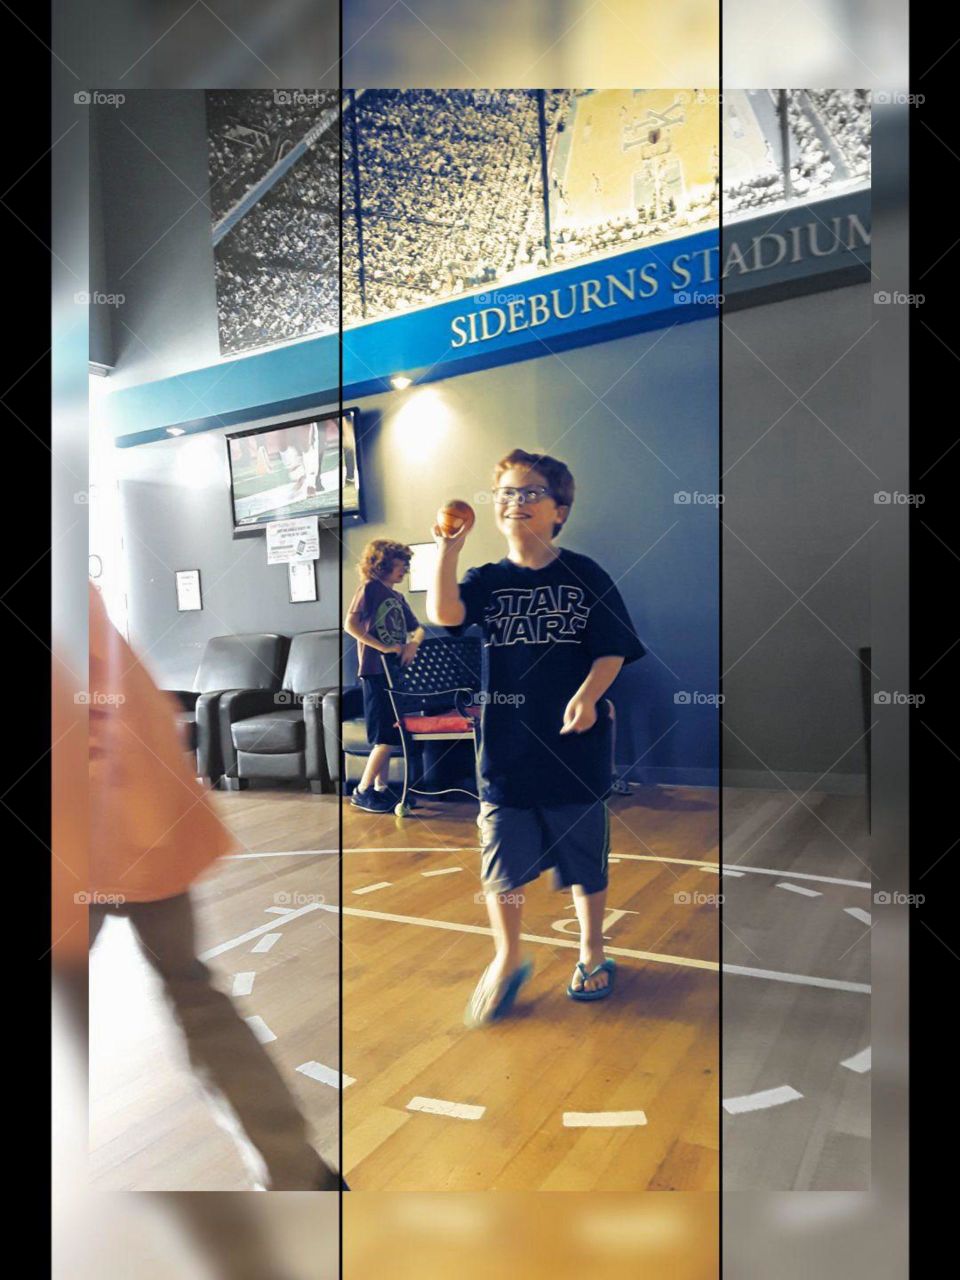 Shooting some hoops while waiting for a haircut!